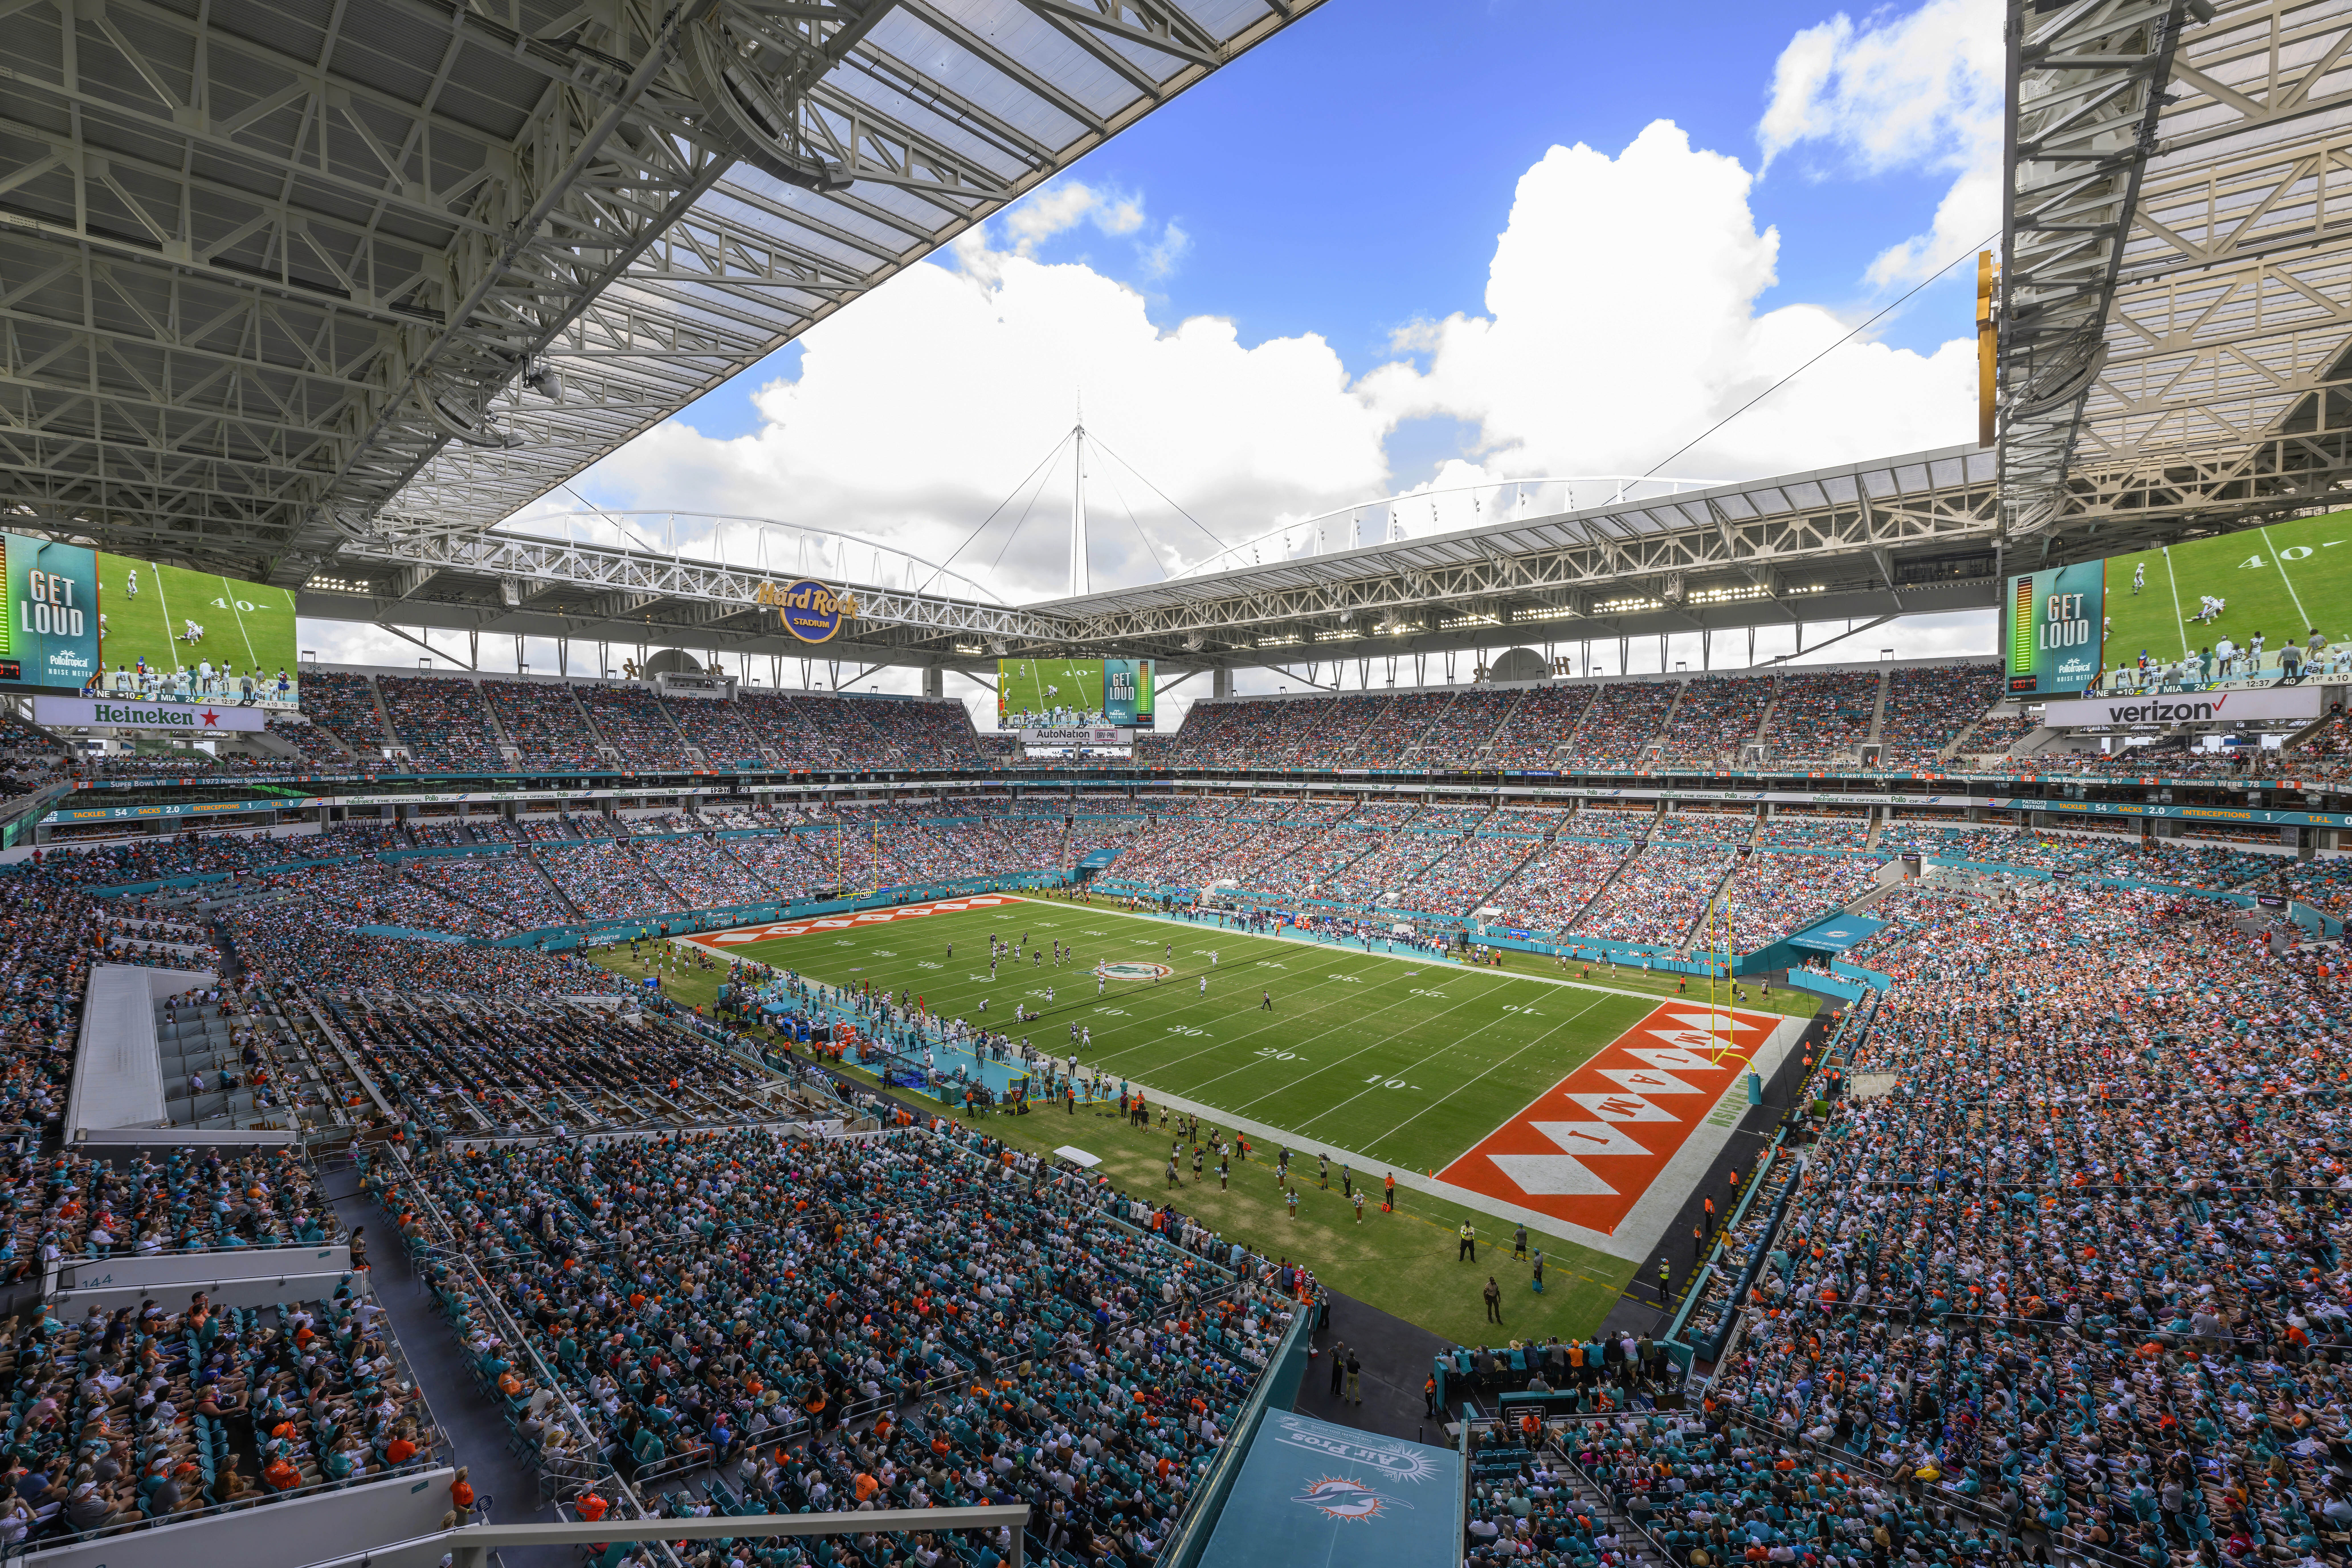 A general overall interior view of the Hard Rock Stadium as the New England Patriots take on the Miami Dolphins during an NFL football game, Sunday, Oct. 29, 2023, in Miami Gardens, Fla. The 2026 World Cup final will be played at MetLife Stadium in East Rutherford, N.J., on July 19. FIFA made the announcement Sunday, Feb. 4, 2024, at a Miami television studio, allocating the opener of the 39-day tournament to Mexico City’s Estadio Azteca on June 11. Quarterfinals will be at Gillette Stadium in Foxborough, Mass., on July 9, at SoFi Stadium in Inglewood, Calif., the following day and at Arrowhead Stadium in Kansas City, Mo., and Hard Rock Stadium in Miami Gardens, Fla., on July 11. (AP Photo/Doug Murray)